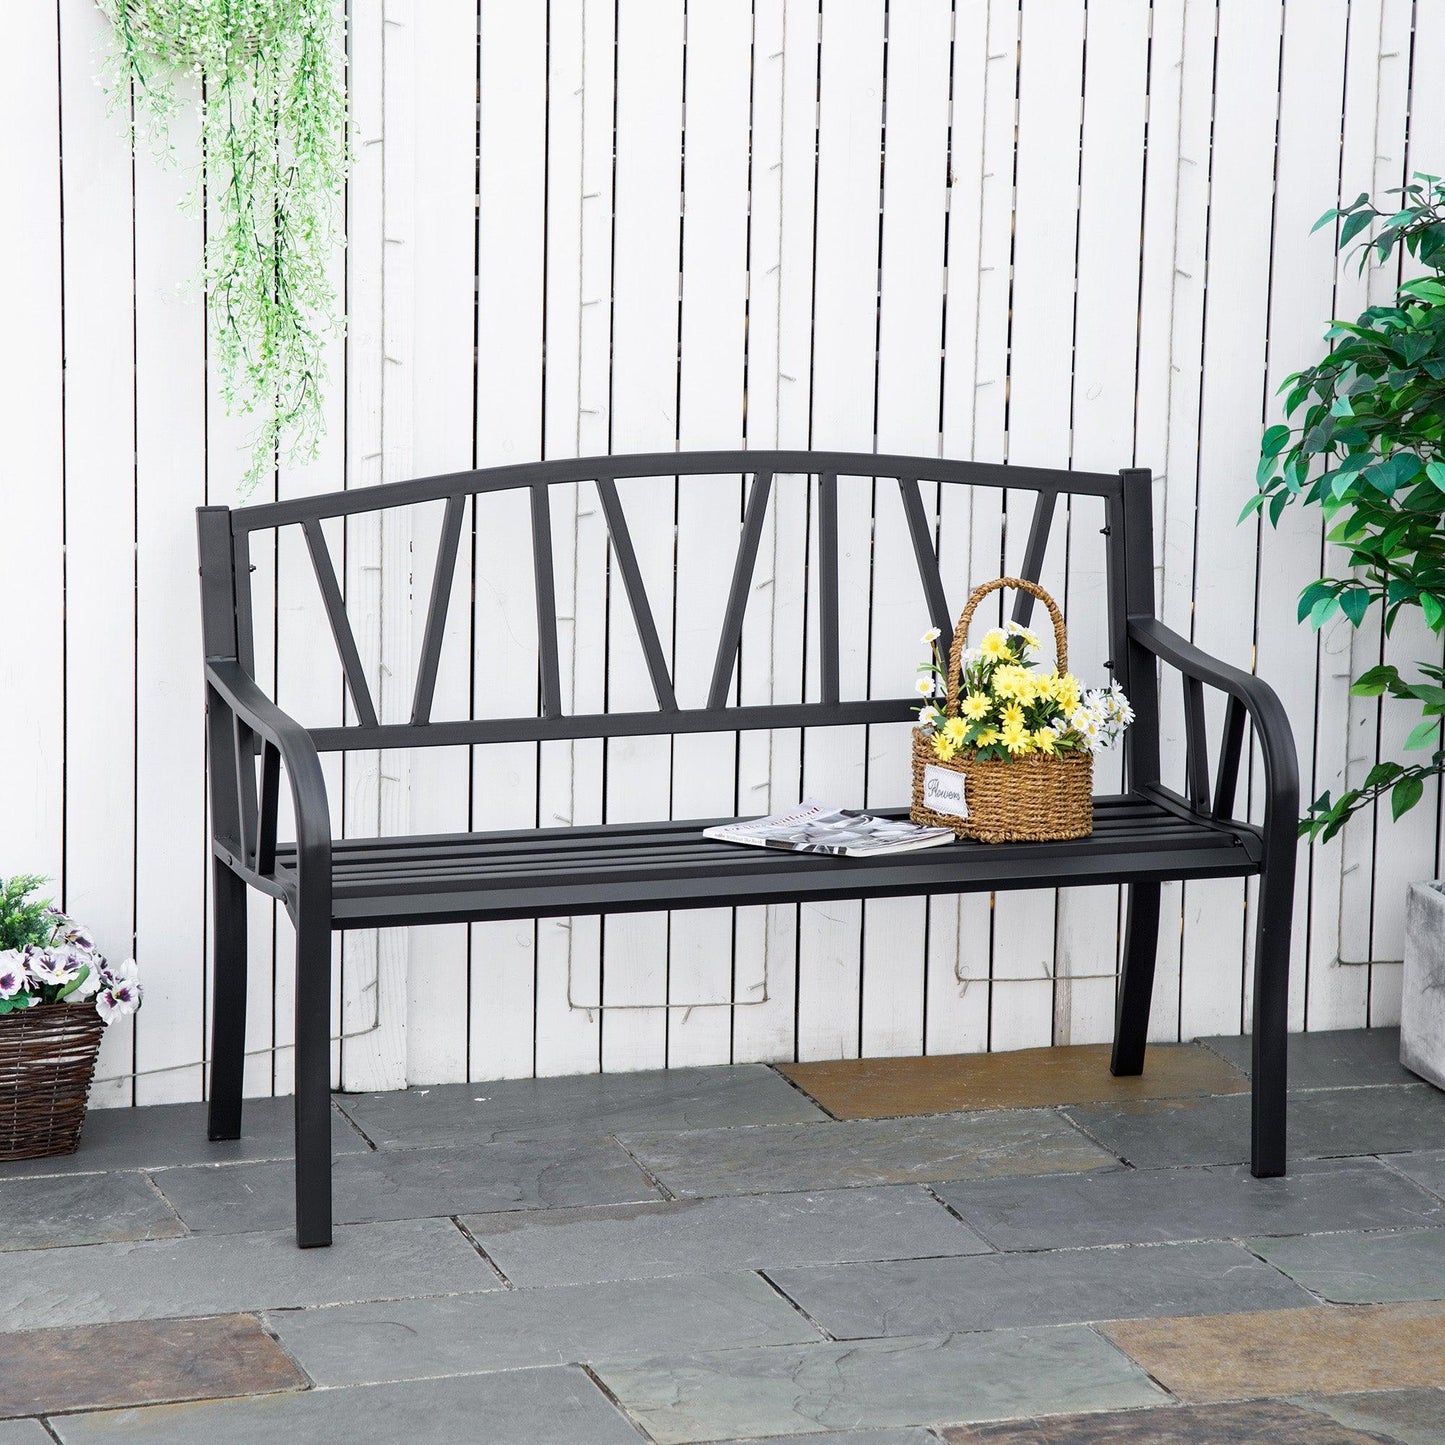 Outsunny Metal Loveseat for Patio - 2-Seater Garden Bench - ALL4U RETAILER LTD